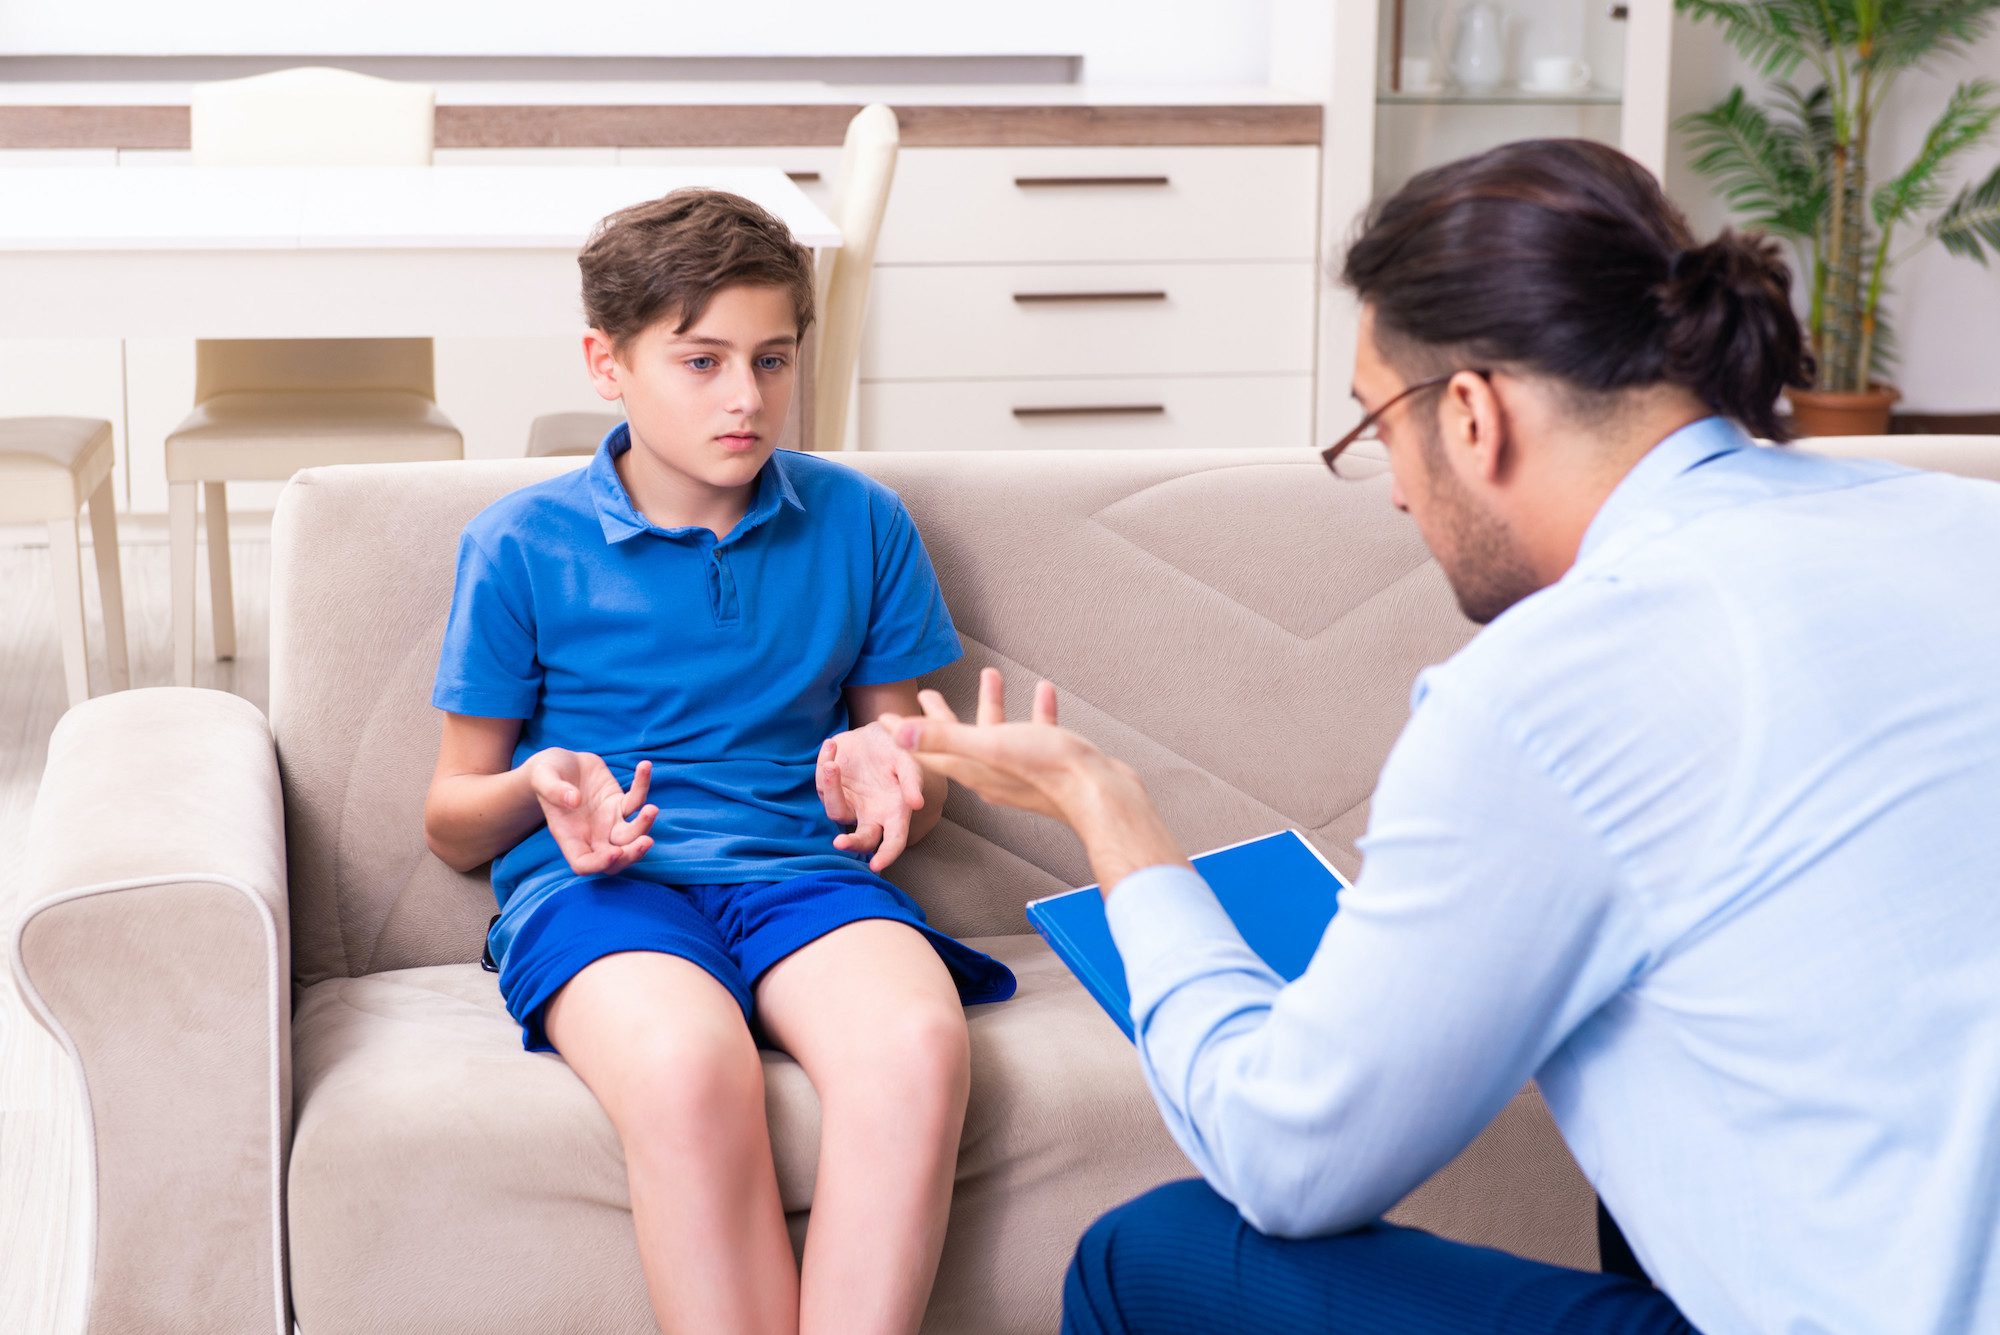 CBT for ADHD - Psychologist talking to boy on a couch